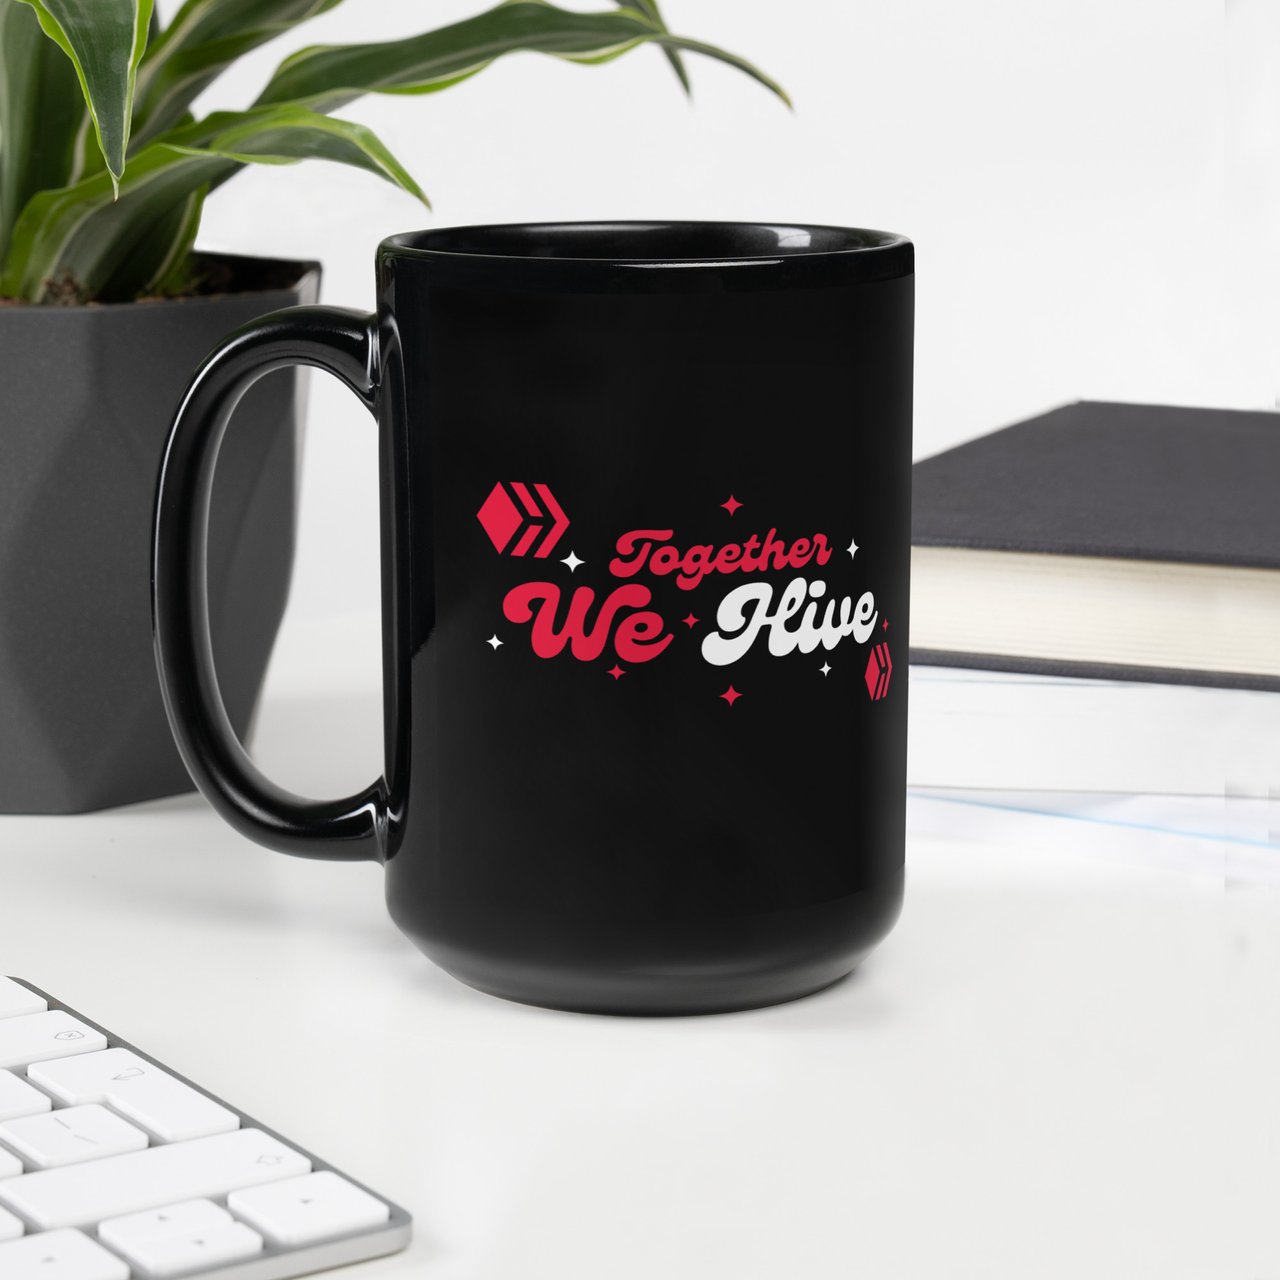 Get Some Creative Inspiration With The Together We Hive Coffee Mug